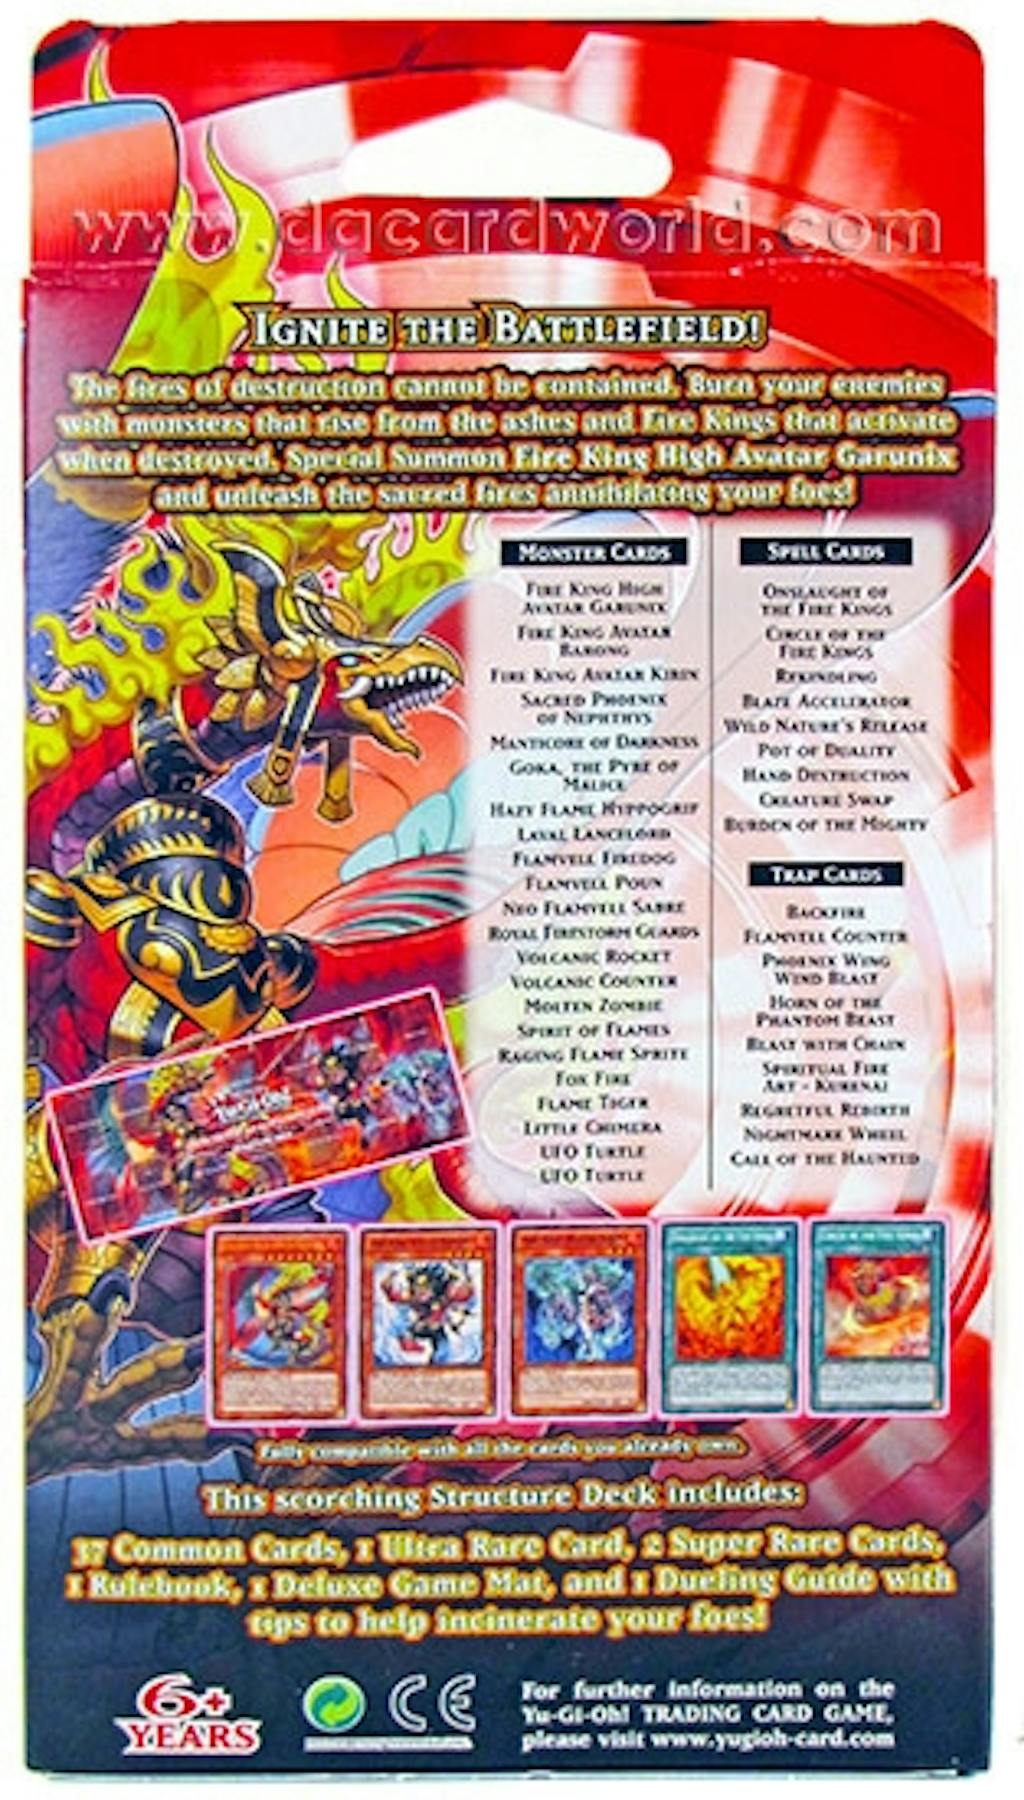 Konami YuGiOh Onslaught of the Fire Kings Structure Deck DA Card World